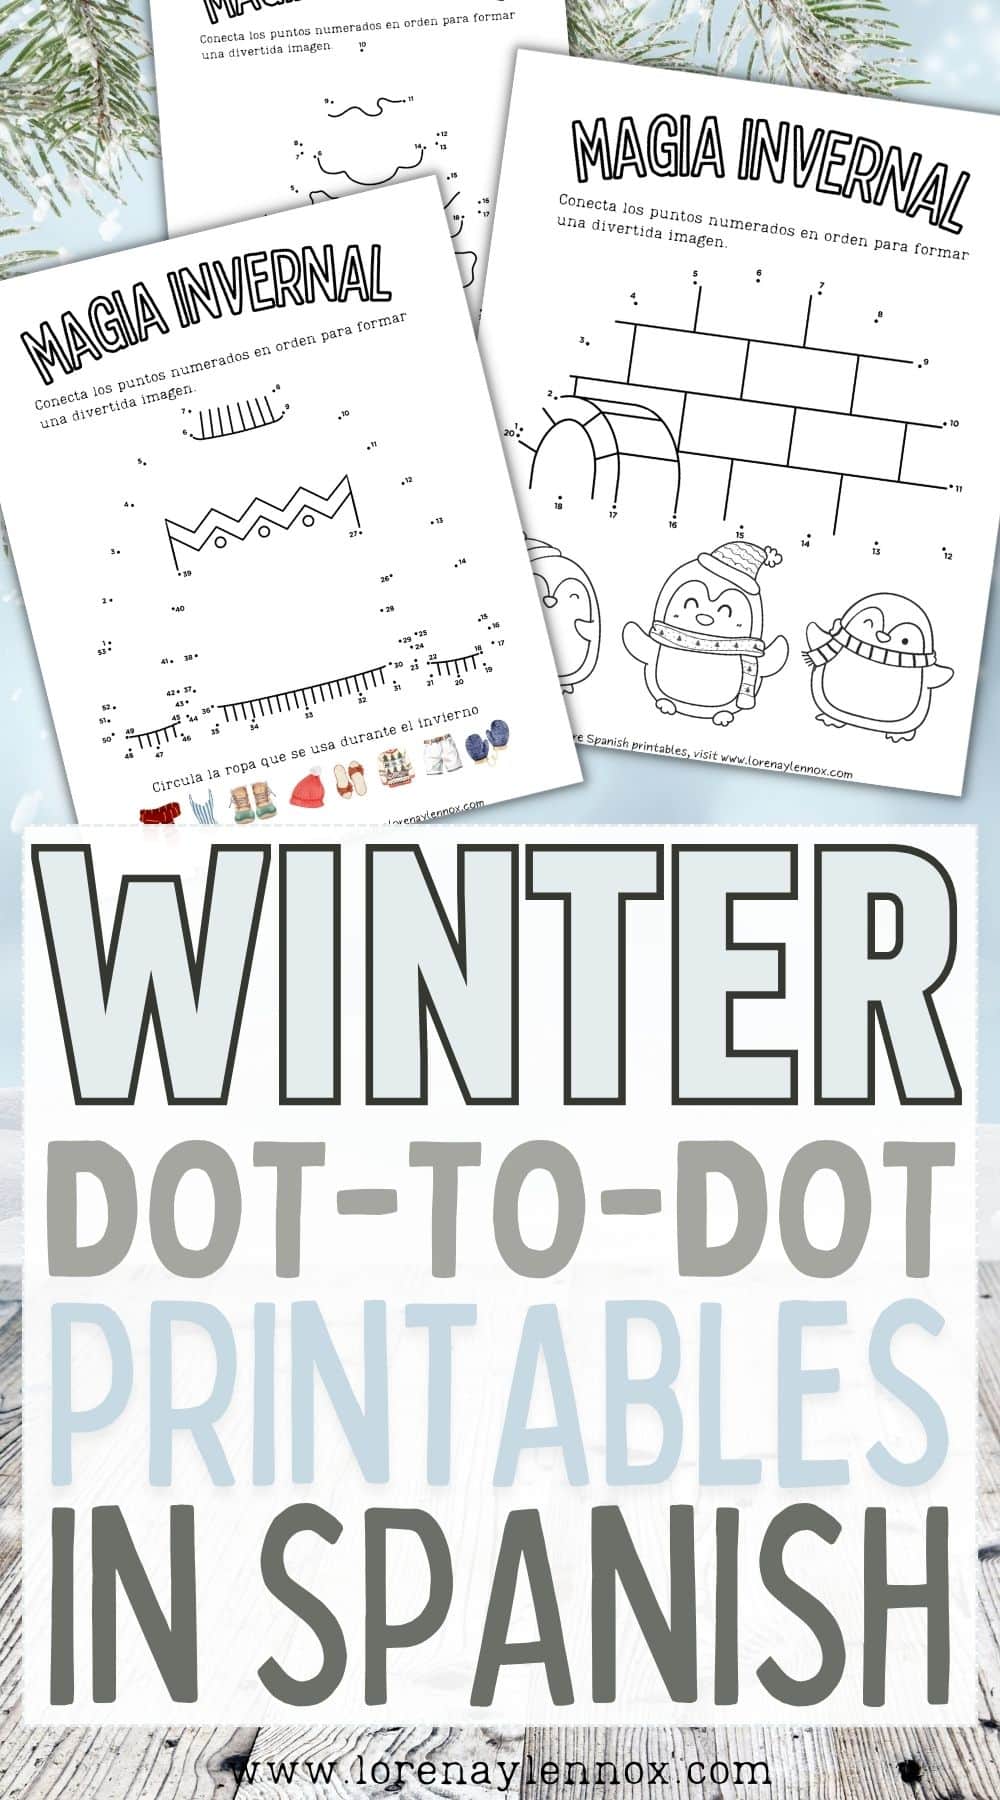 Explore the magic of winter with our charming dot-to-dot printables en español! ❄️ Connect the dots to reveal delightful winter scenes, perfect for keeping little ones entertained during the chilly days. From snowflakes to snowmen, these activities combine fun and learning. Dive into the frosty world of dot-to-dot excitement! 🧊✨ #WinterPrintables #DotToDot #SpanishActivities